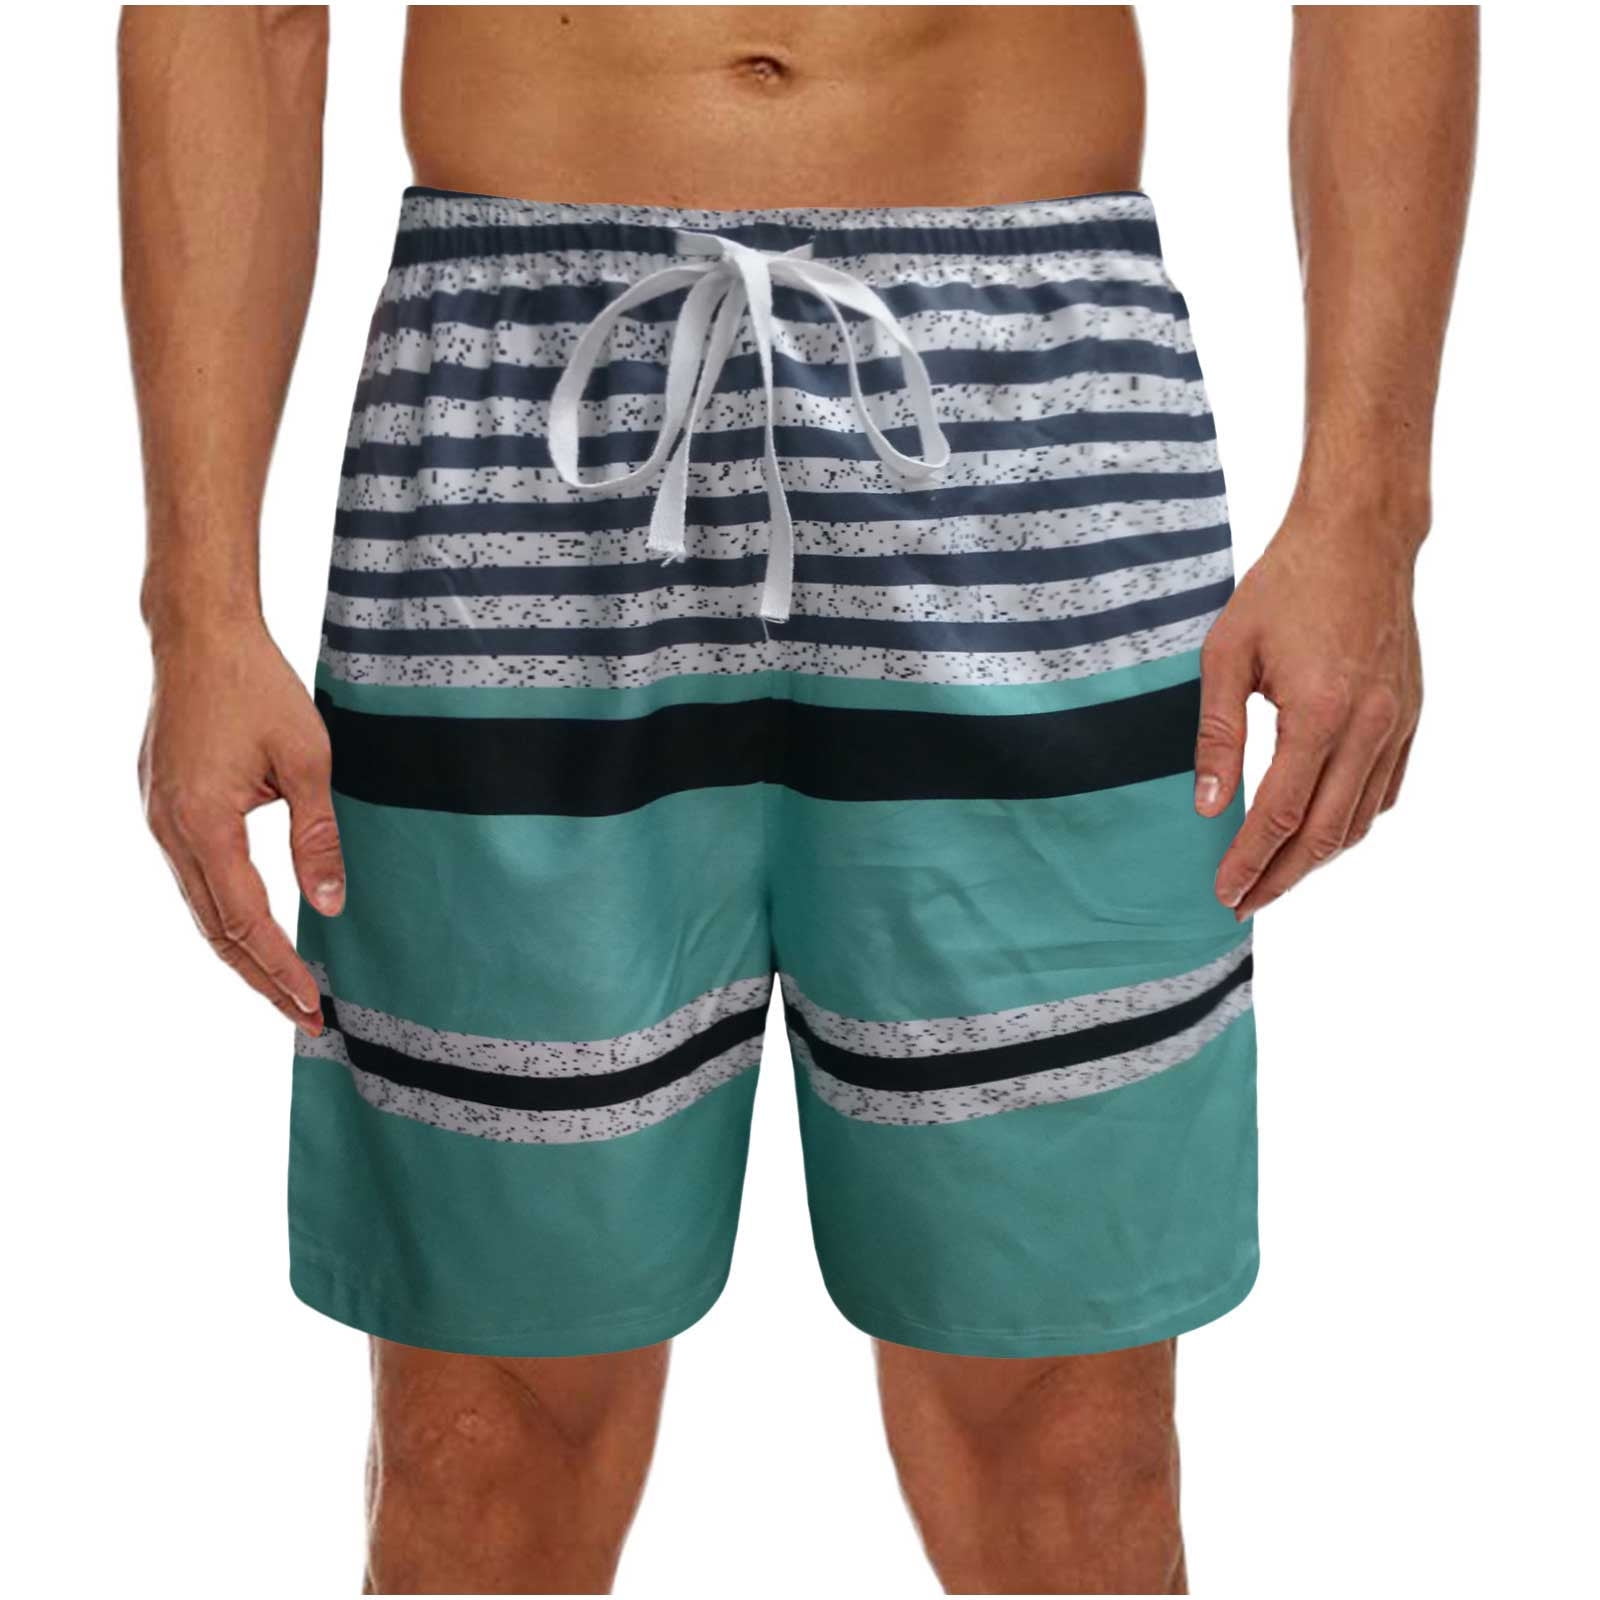  Tofern Mens Swim Trunk Quick Dry Board Shorts with